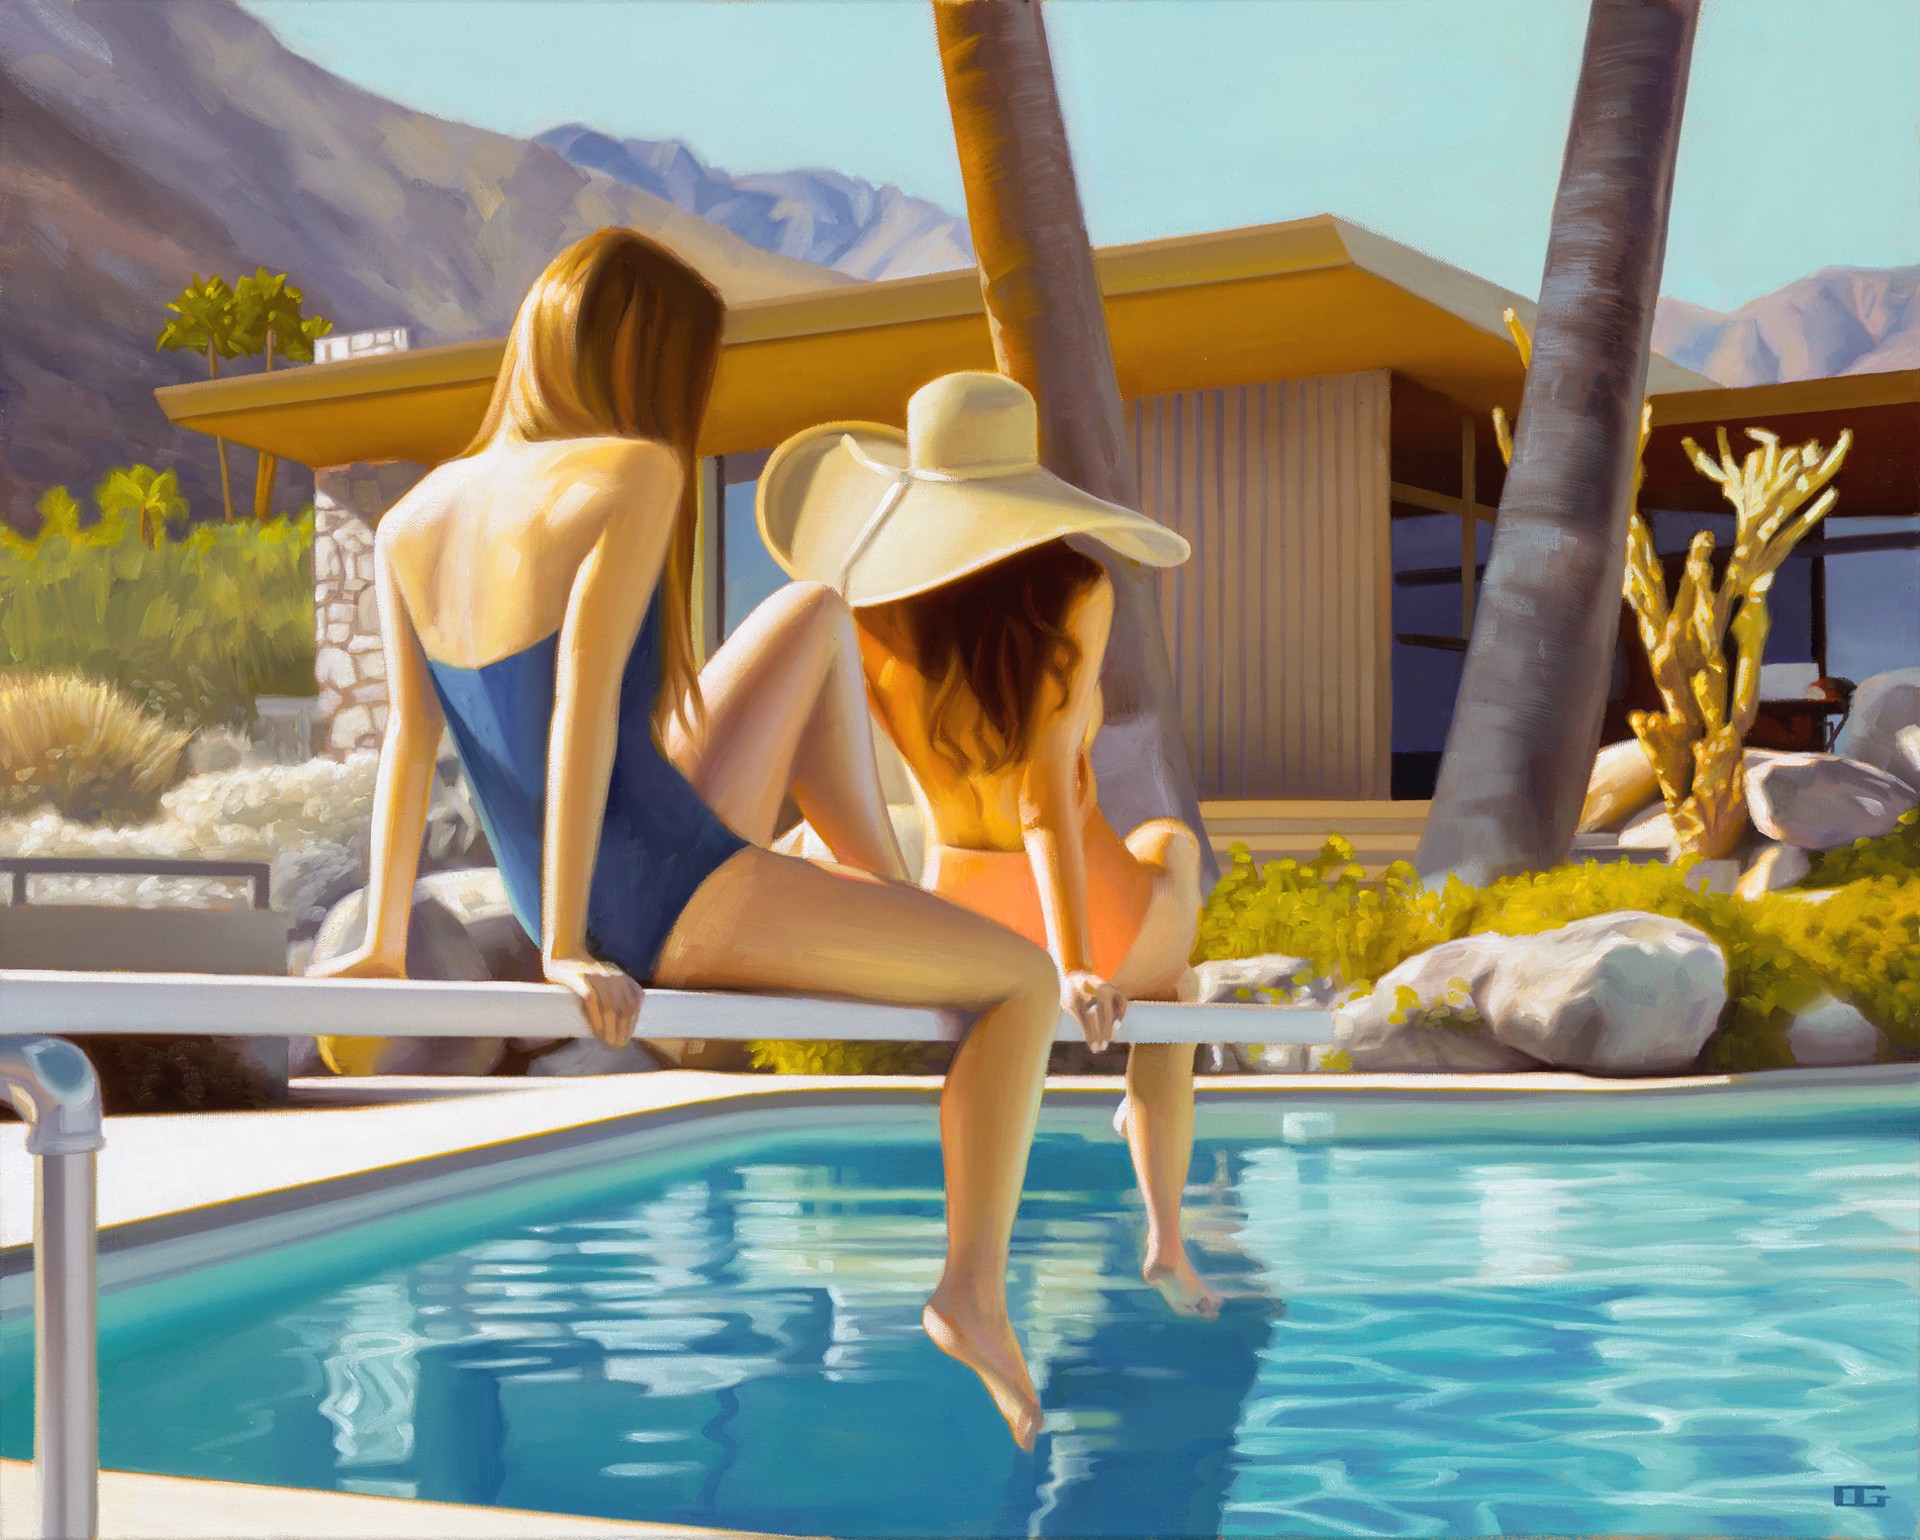 Time for a Dip by Carrie Graber